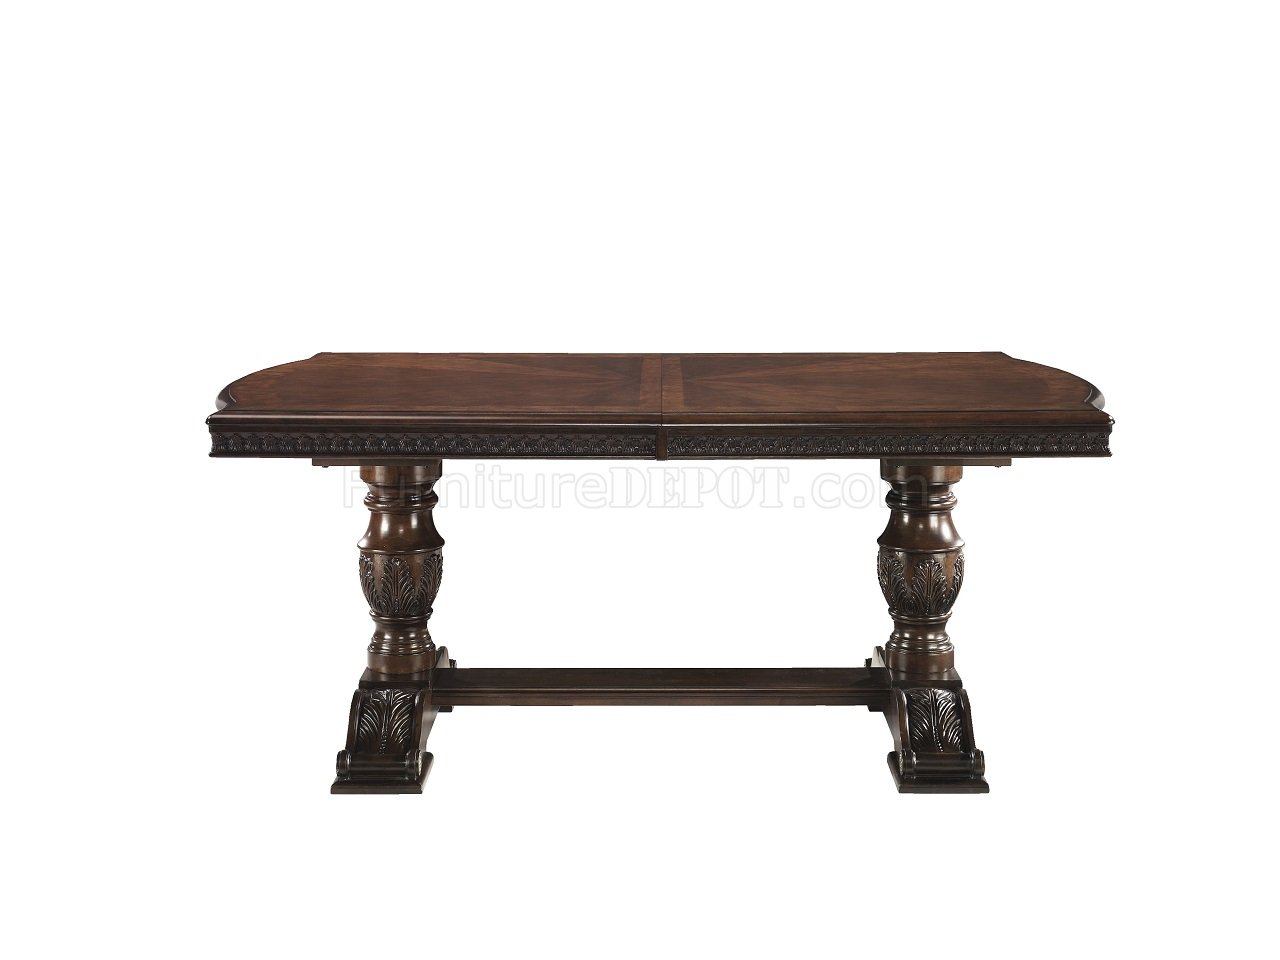 North Shore Dining Table D553-55 Dark Brown - Ashley Furniture